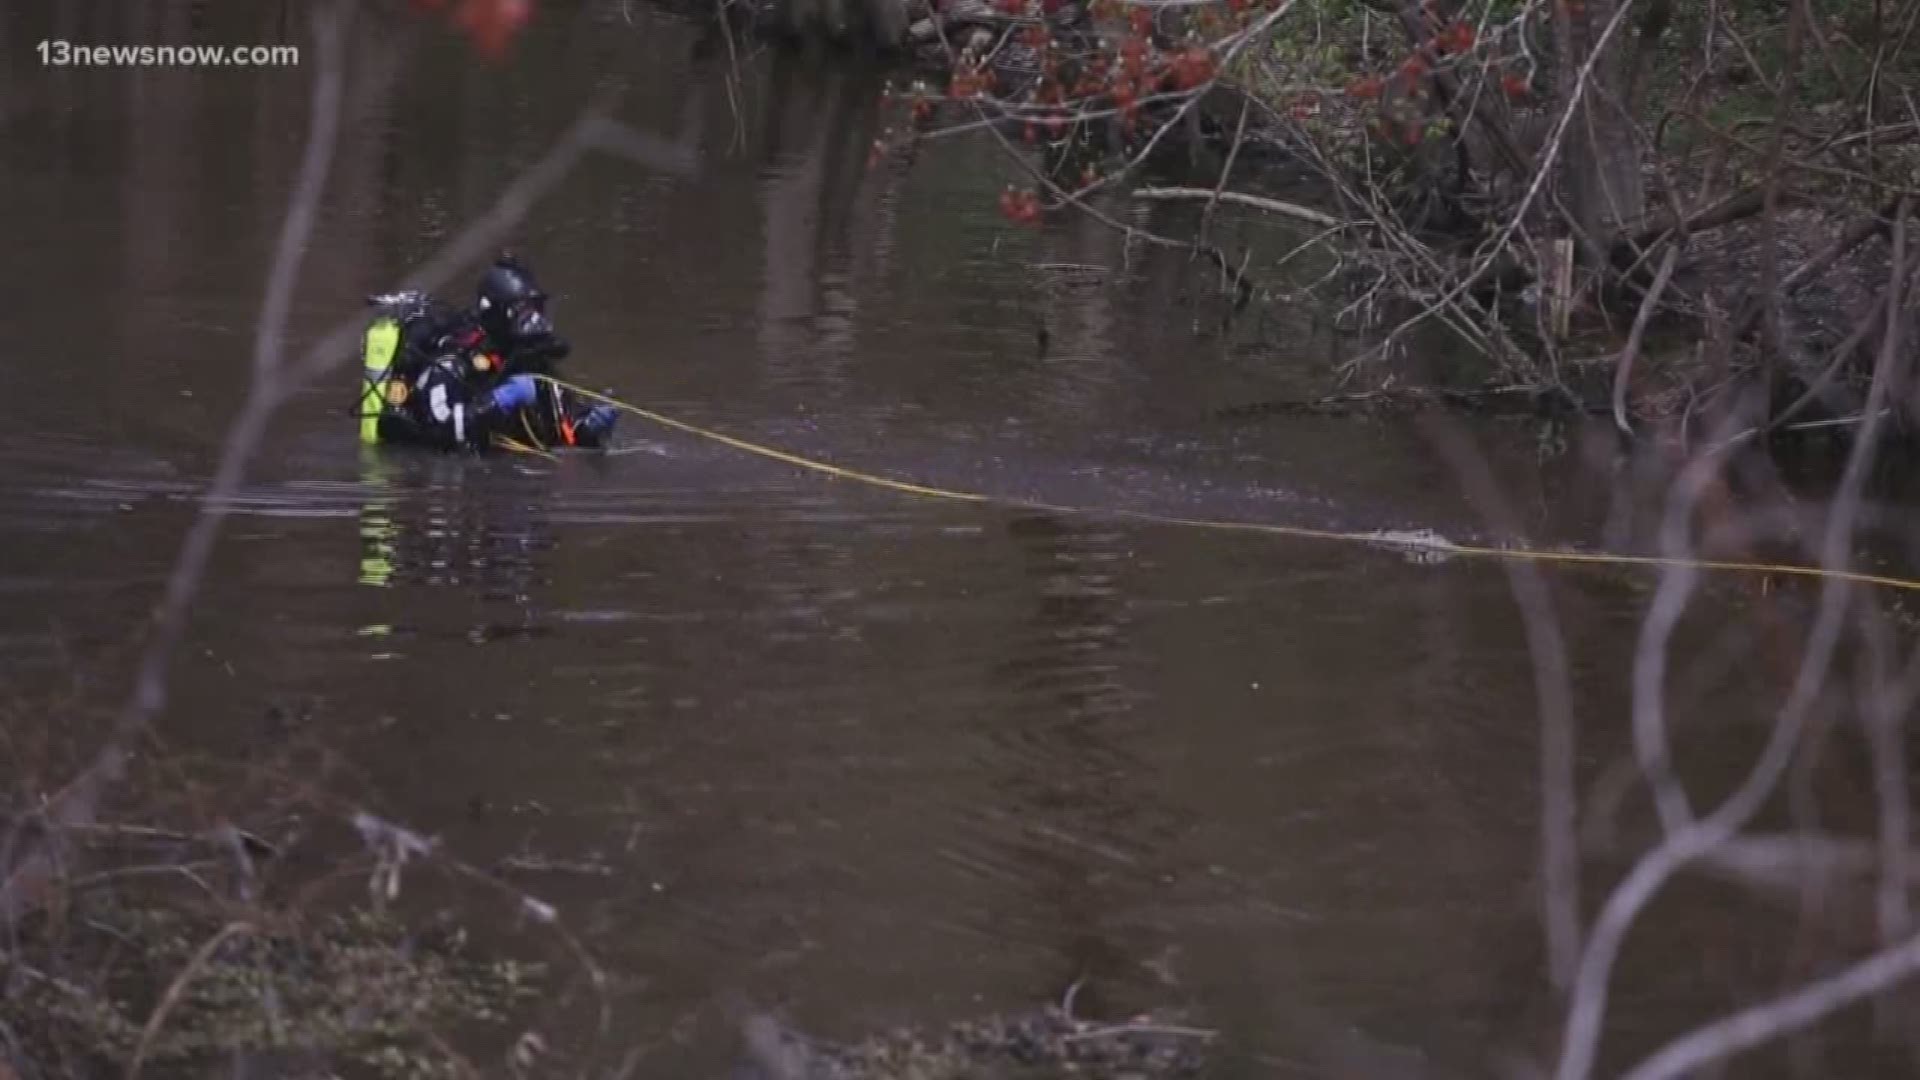 Divers were searching an area near Lake Drummond to continue searching for a woman who went missing in Chesapeake in 2017.